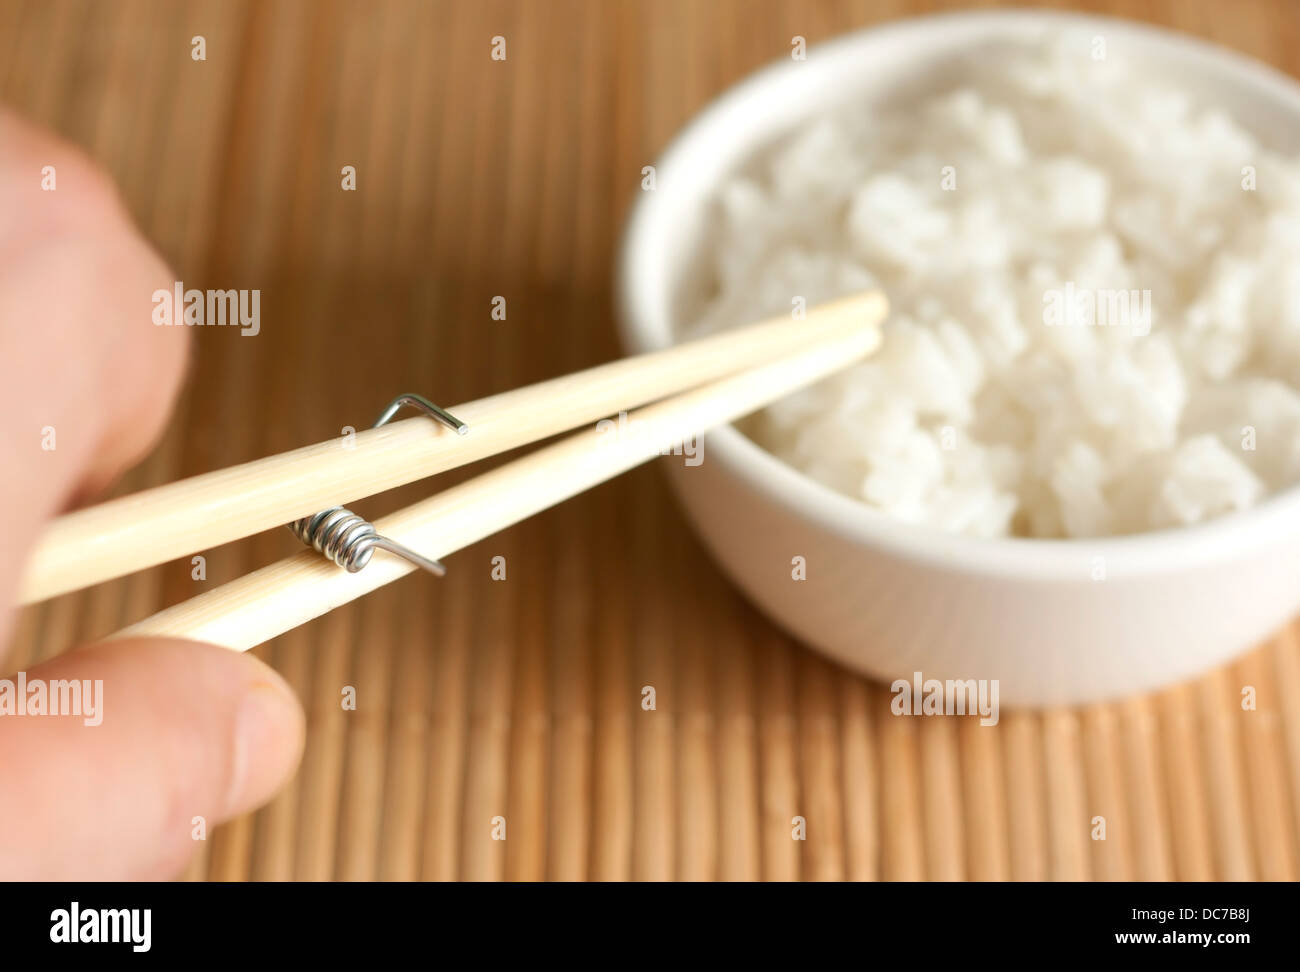 Invention of eating with chopsticks creative food concept Stock Photo